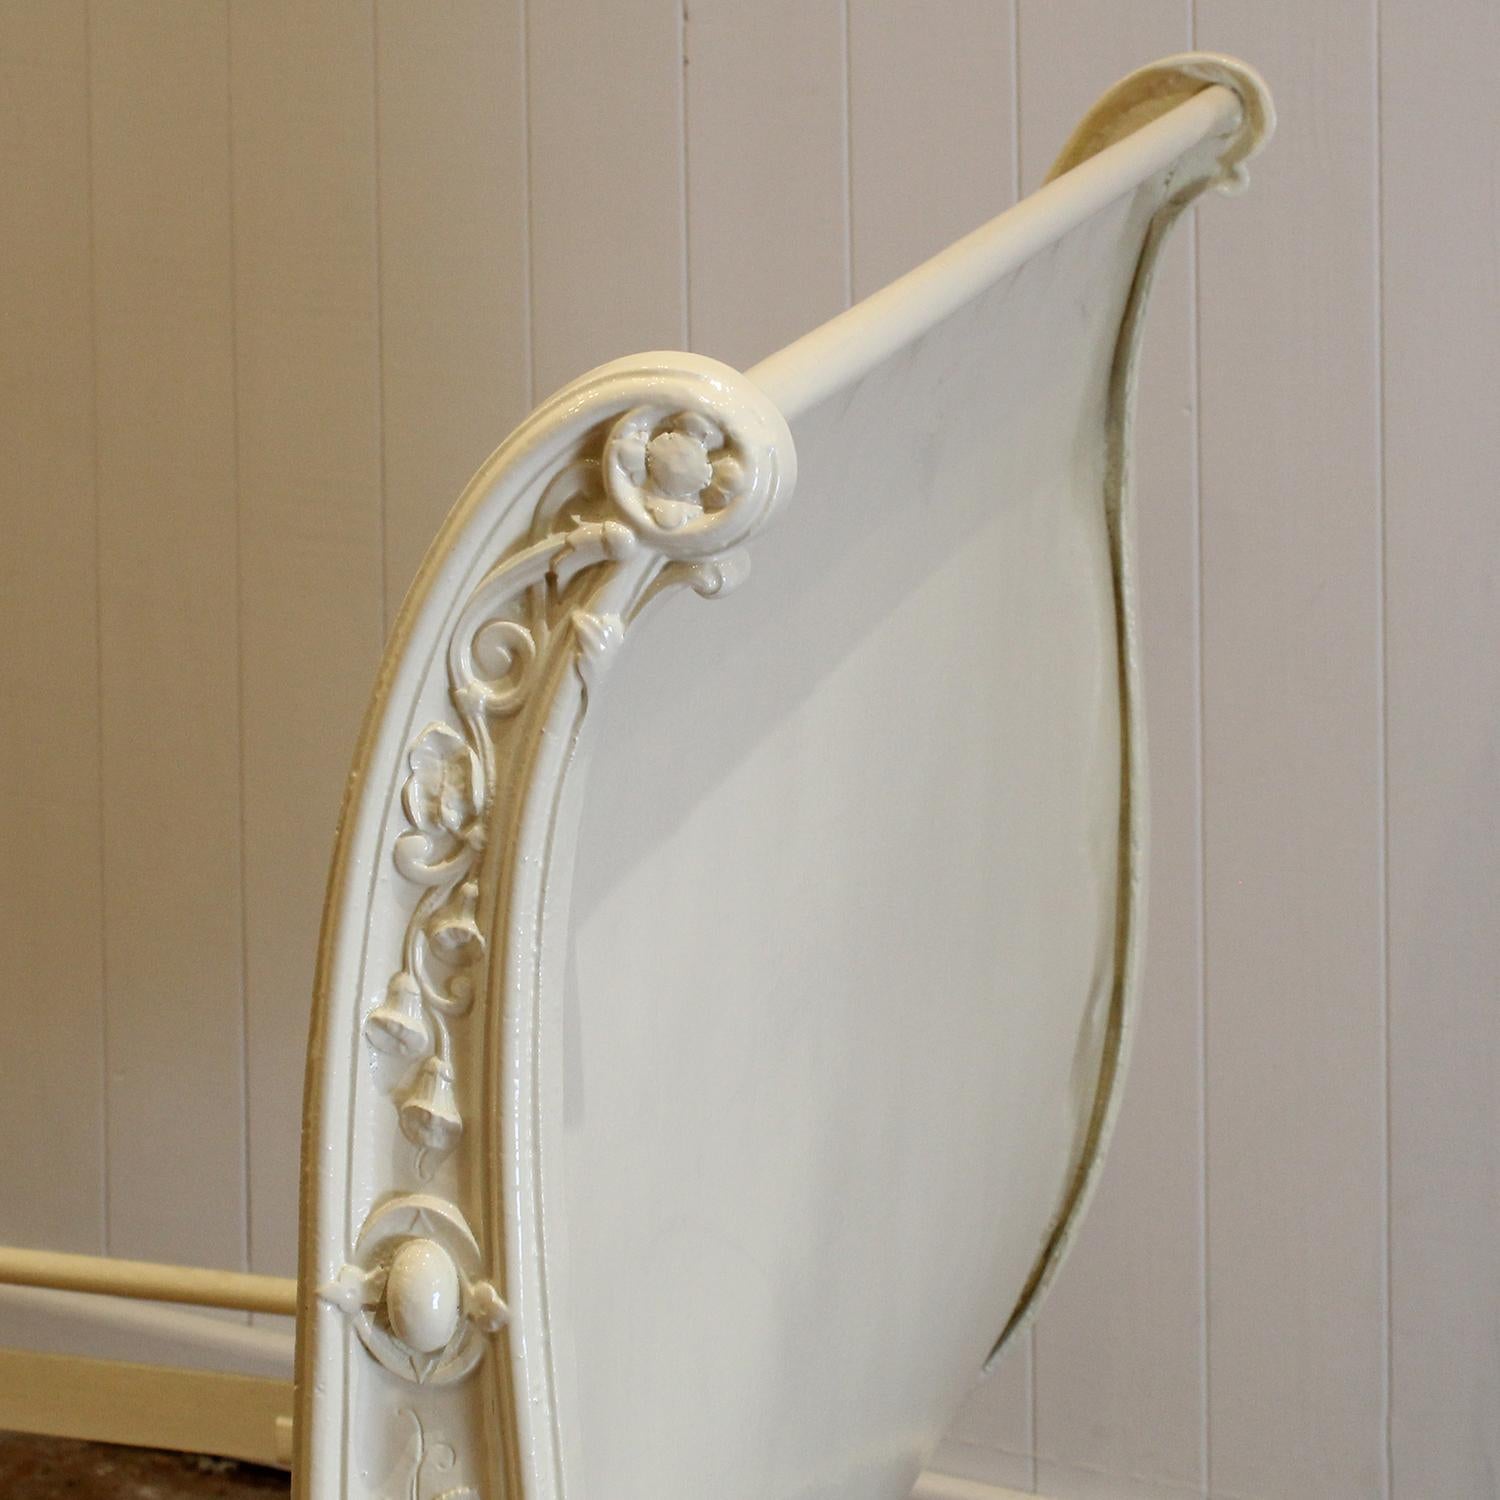 A superb dainty cast iron French day bed, with roule shape ends and ornately cast front side, with a central depiction of a cherub flanked by lines of roses.

The price of this day bed includes a shallow base and a Victoria mattress suitable for